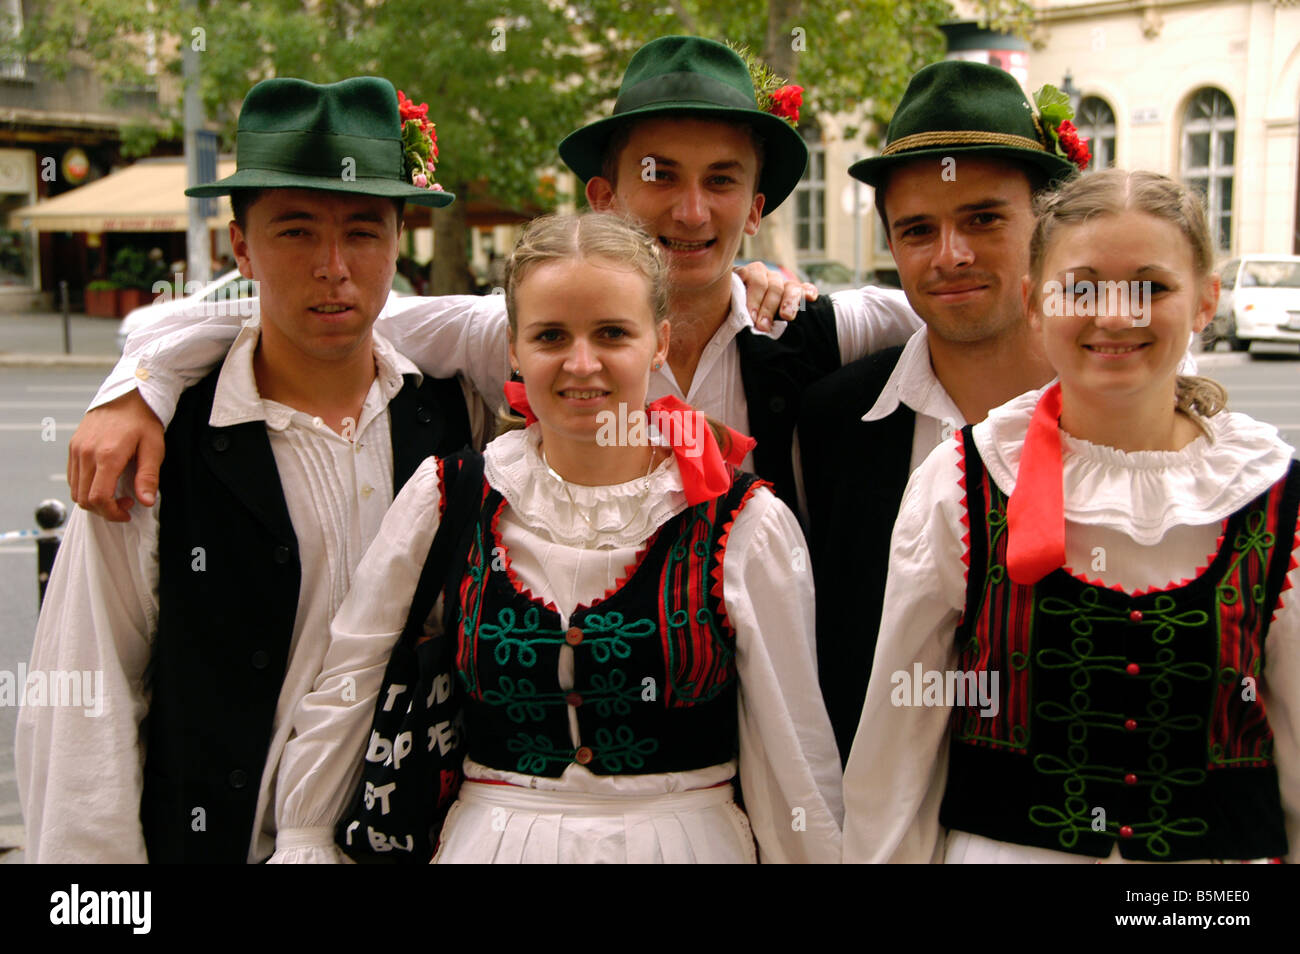 Hungary, Budapest, Pest, a group of young people in traditional dress for St. Stephen's Day Celebrations Stock Photo